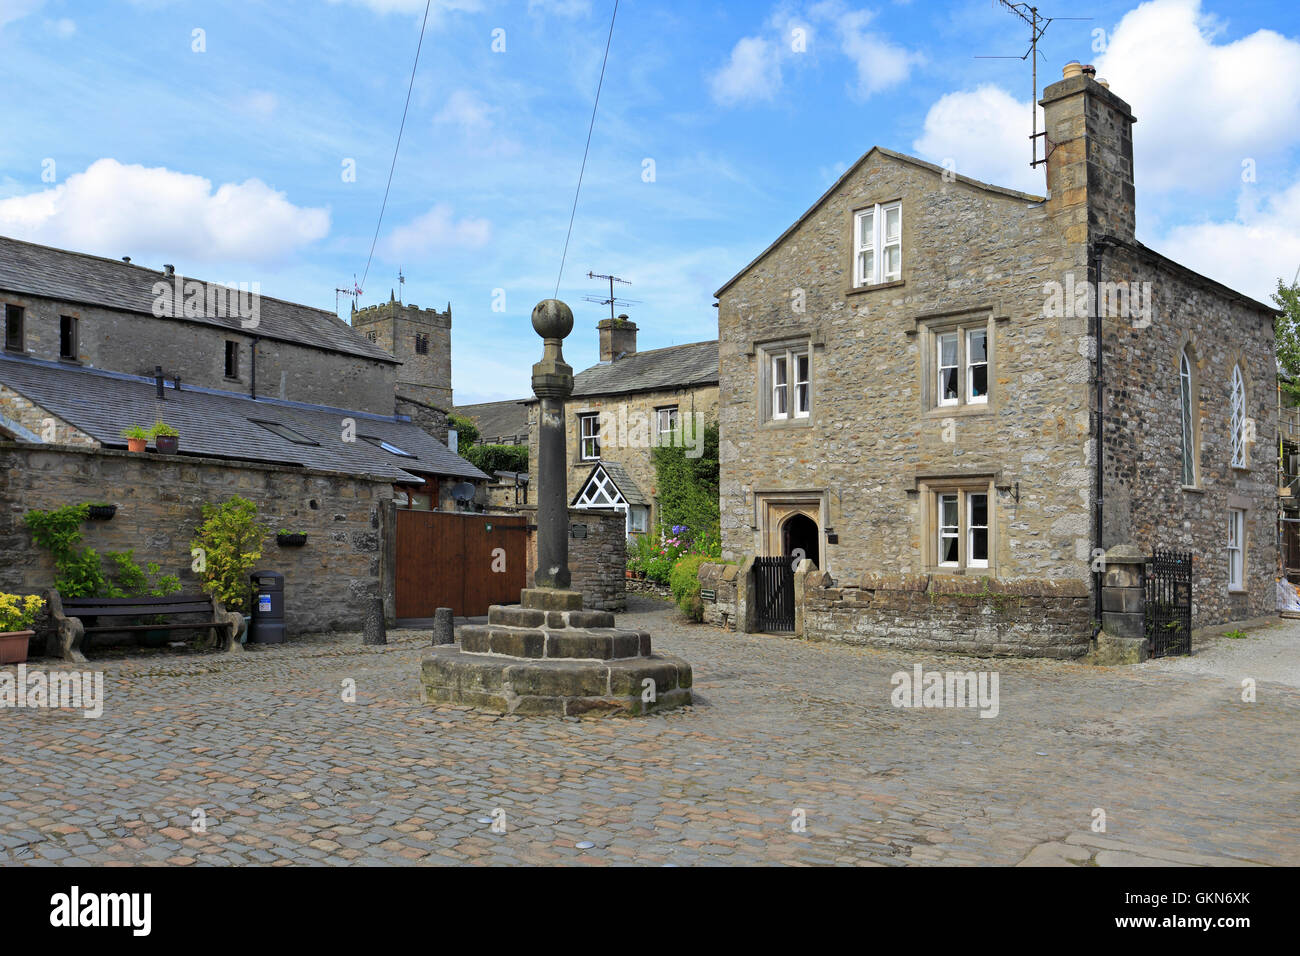 Old Market Cross and Abbot's Hall in the Swine Market, Kirkby Londsale, Cumbria, England, UK. Stock Photo